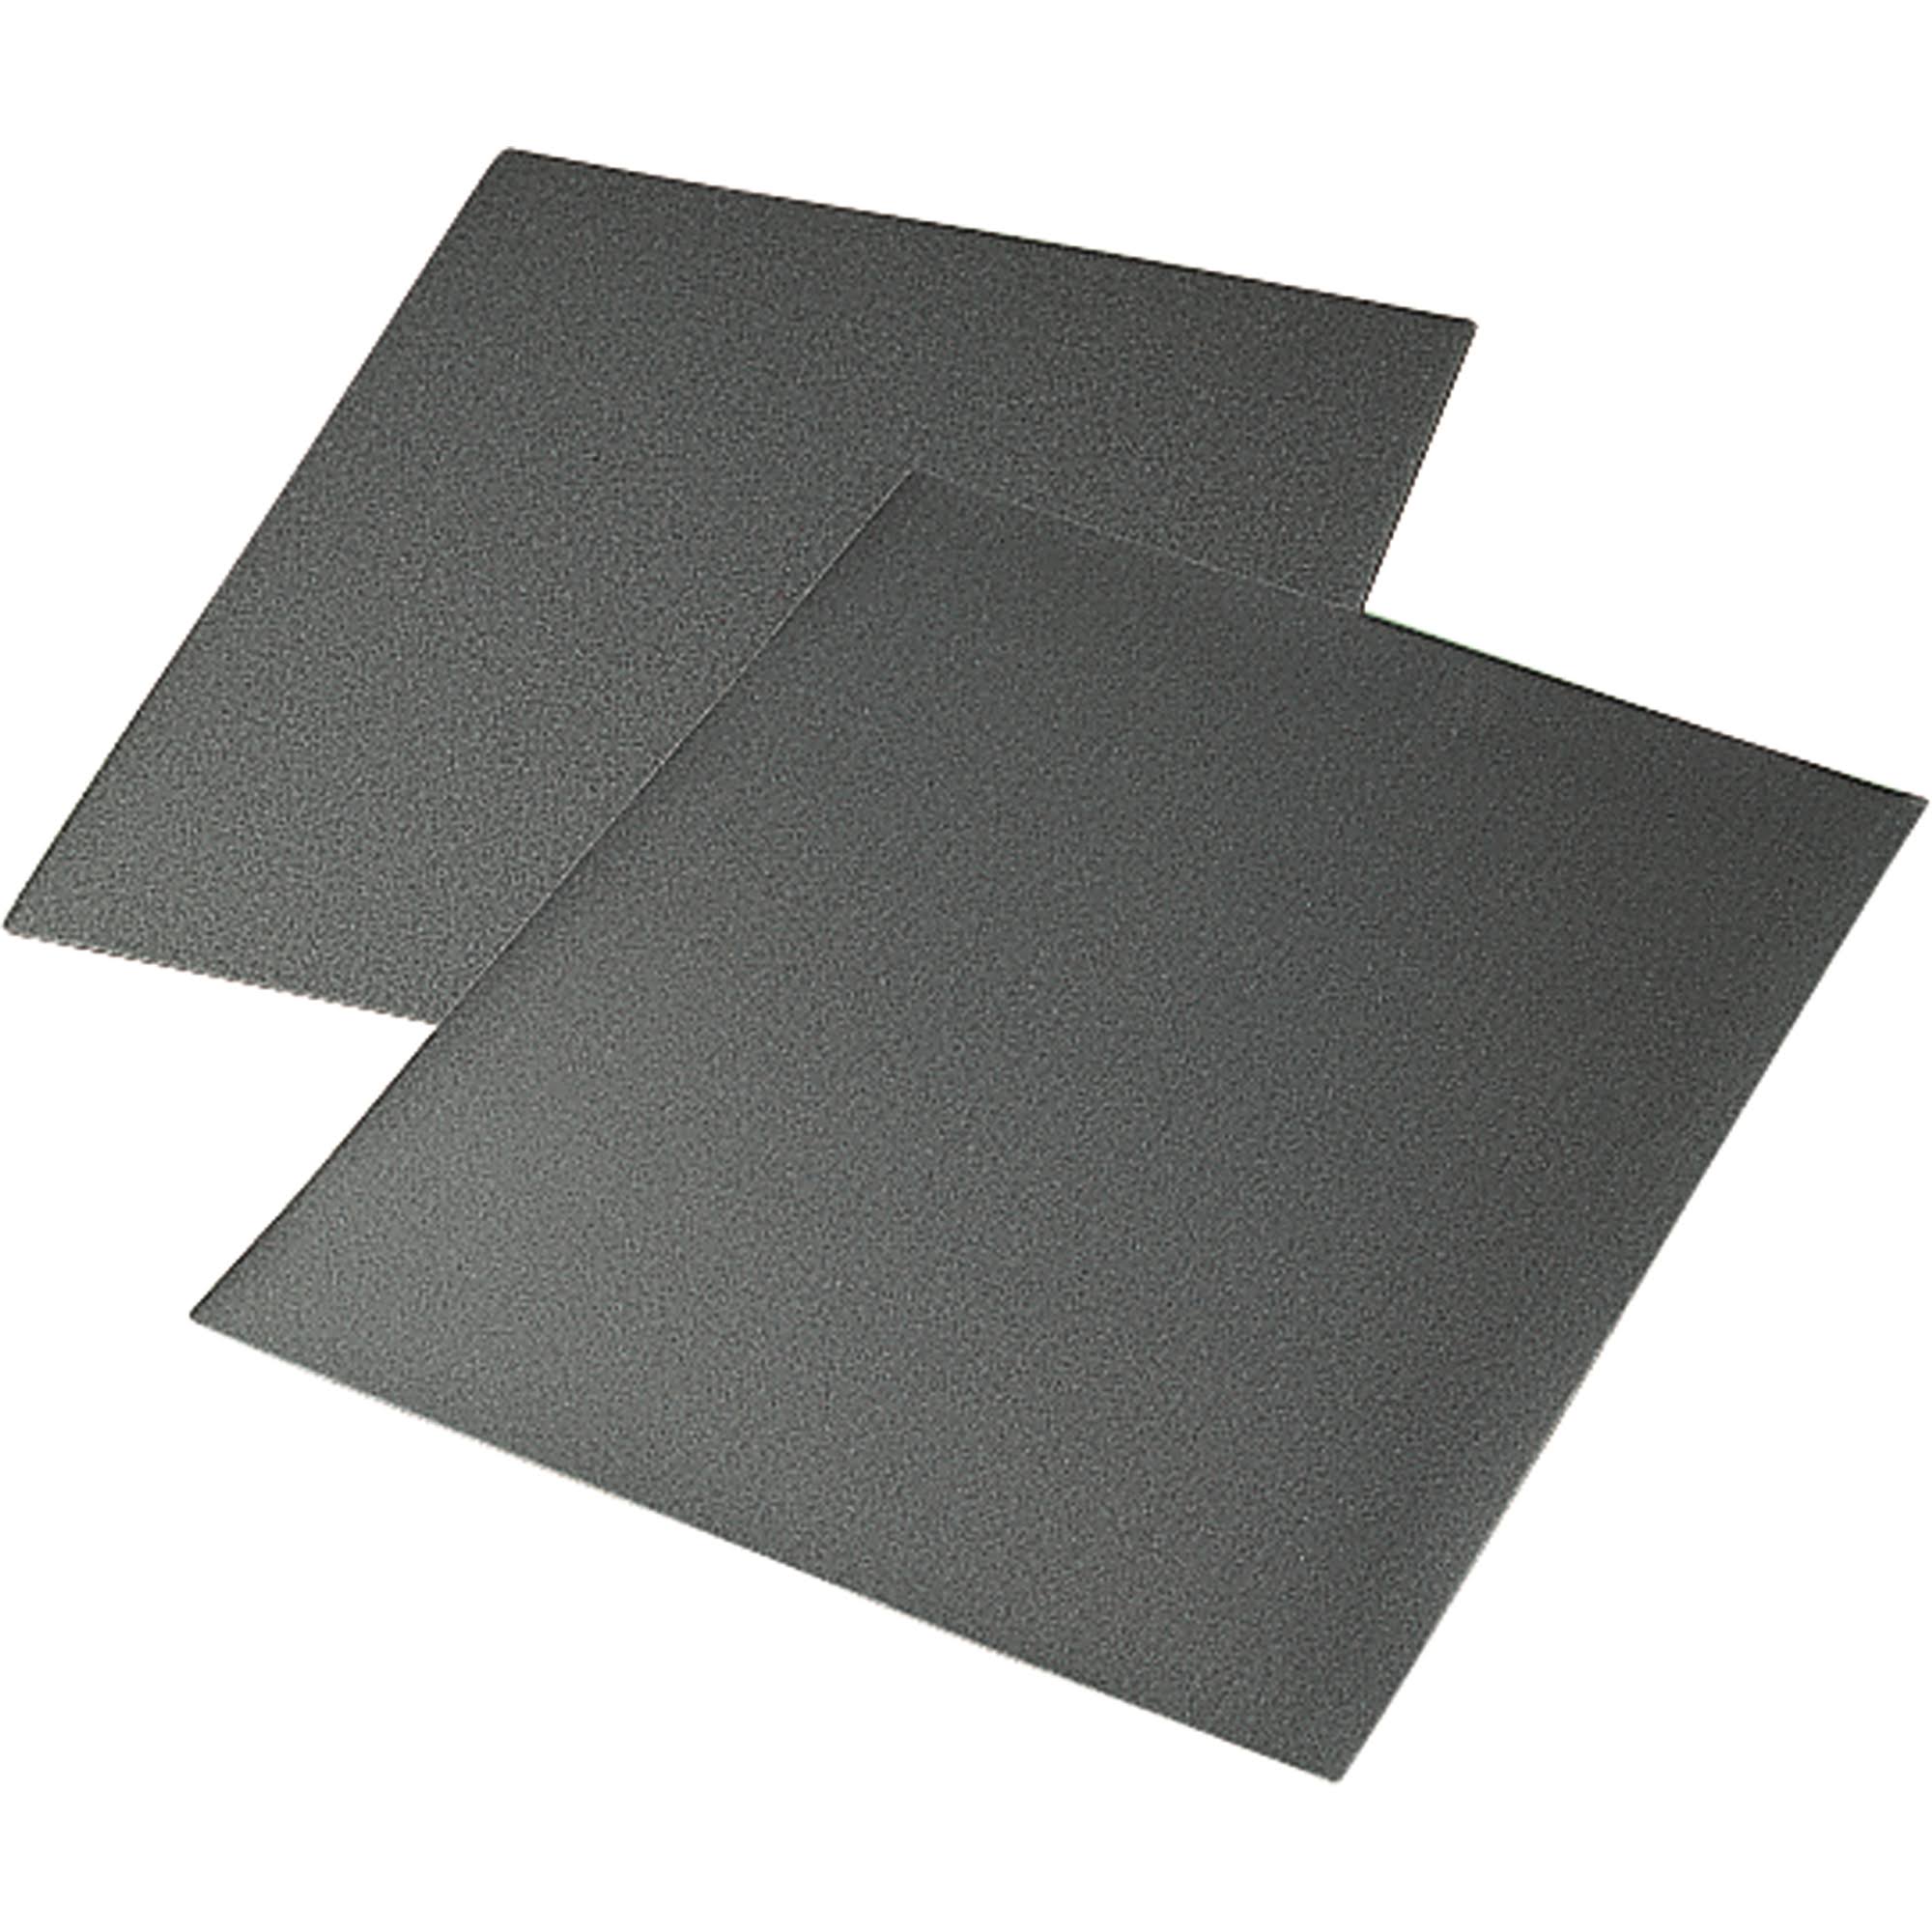 3m Pro Pak Wet and Dry Sanding Sheets - 150 Grit, 9" X 11"